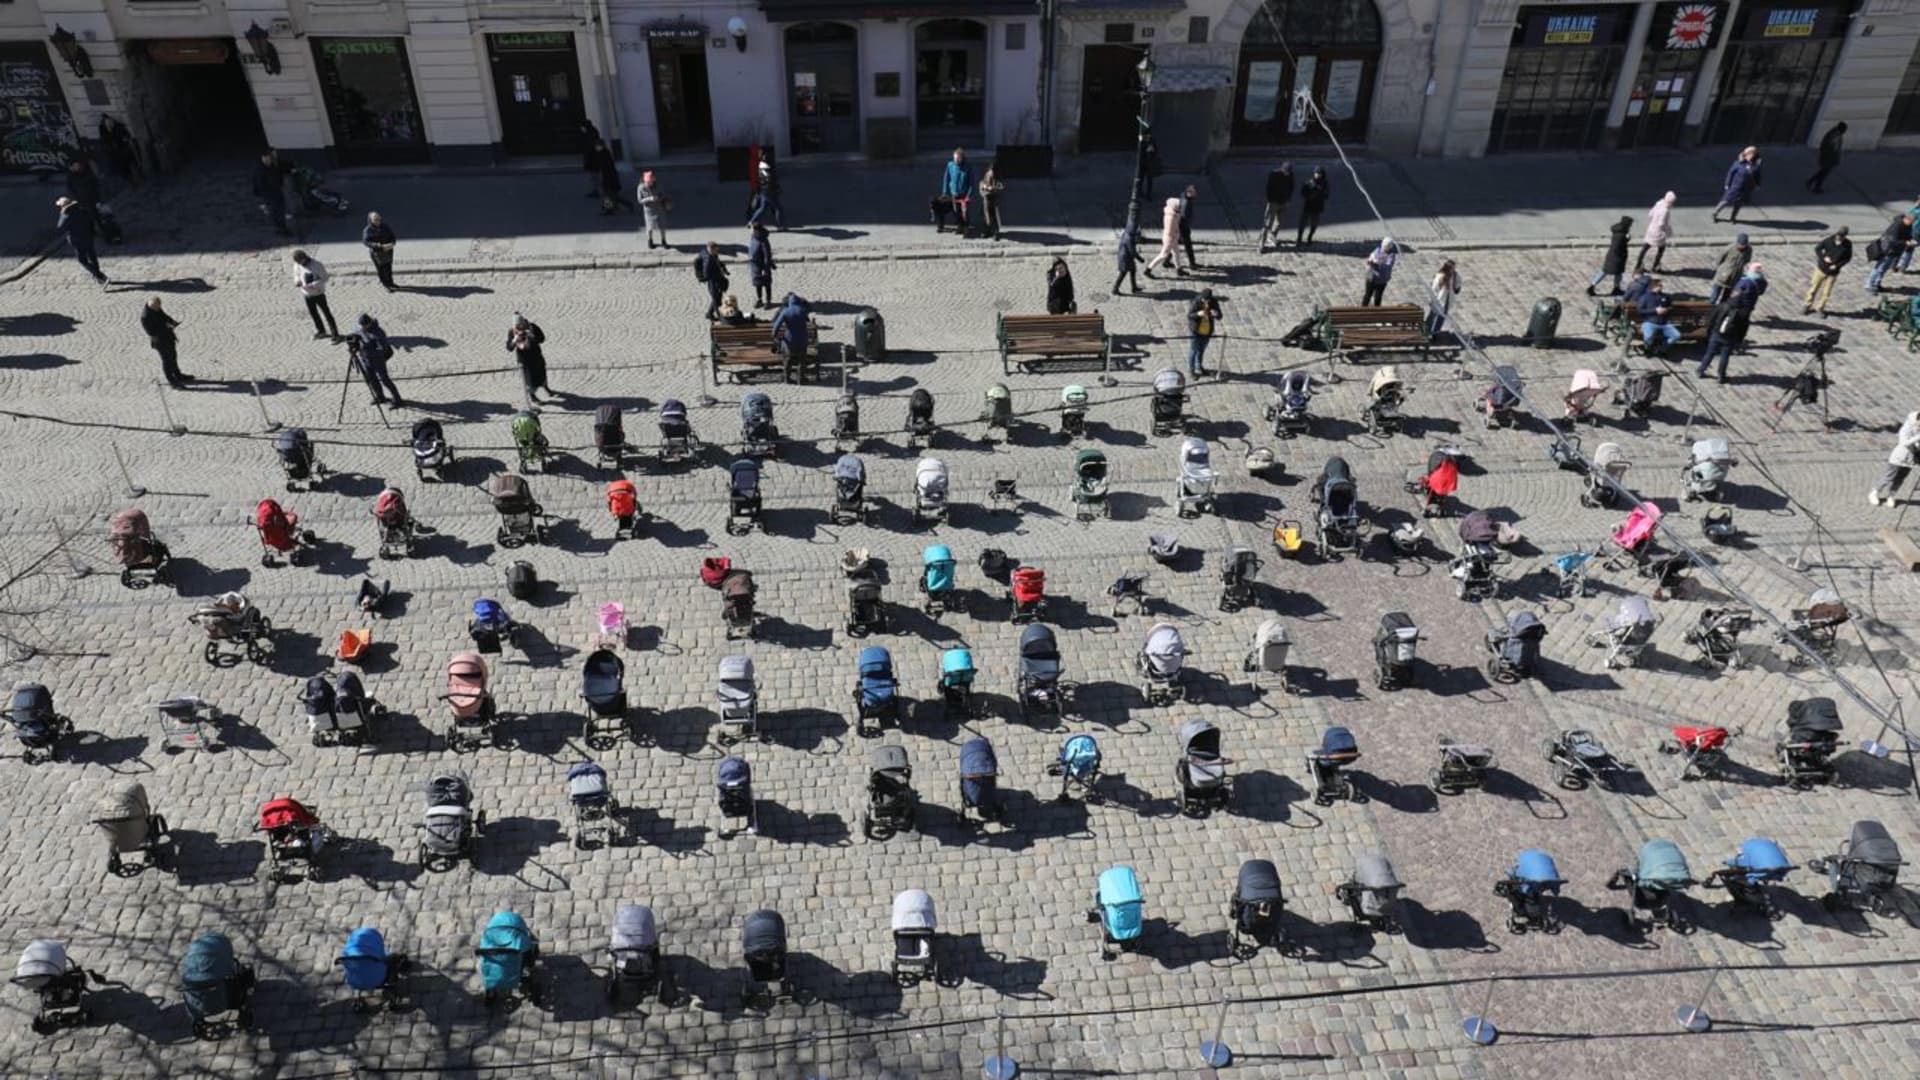 109 empty strollers placed on Lviv's Rynok Square on March 18. Ukrainian authorities say 109 children have been killed by Russian attacks since Russia invaded Ukraine.